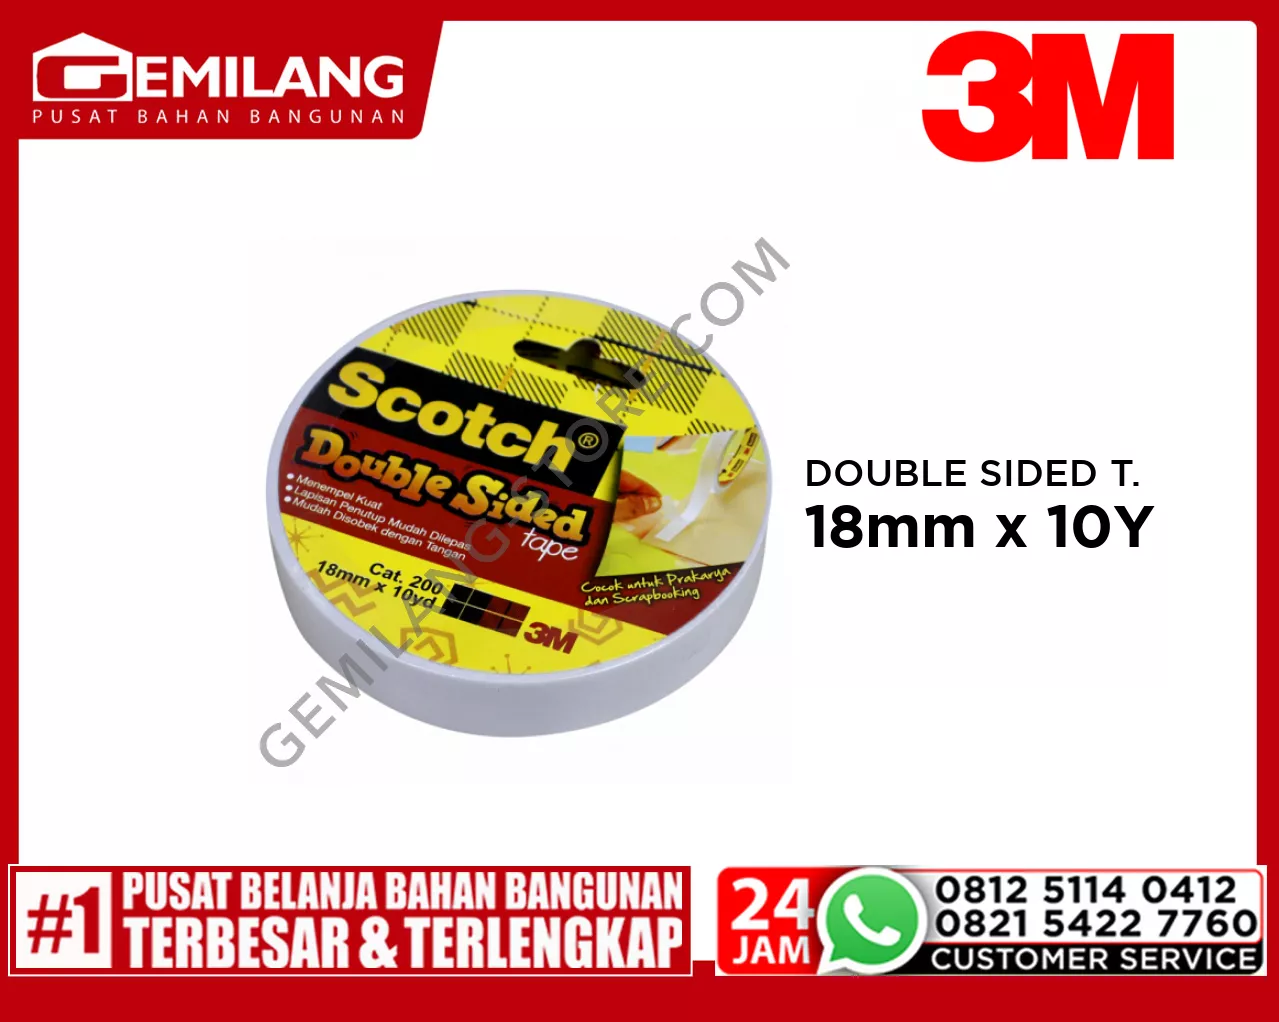 3M SCOTCH DOUBLE SIDED TAPE 18mm x 10 Y 200